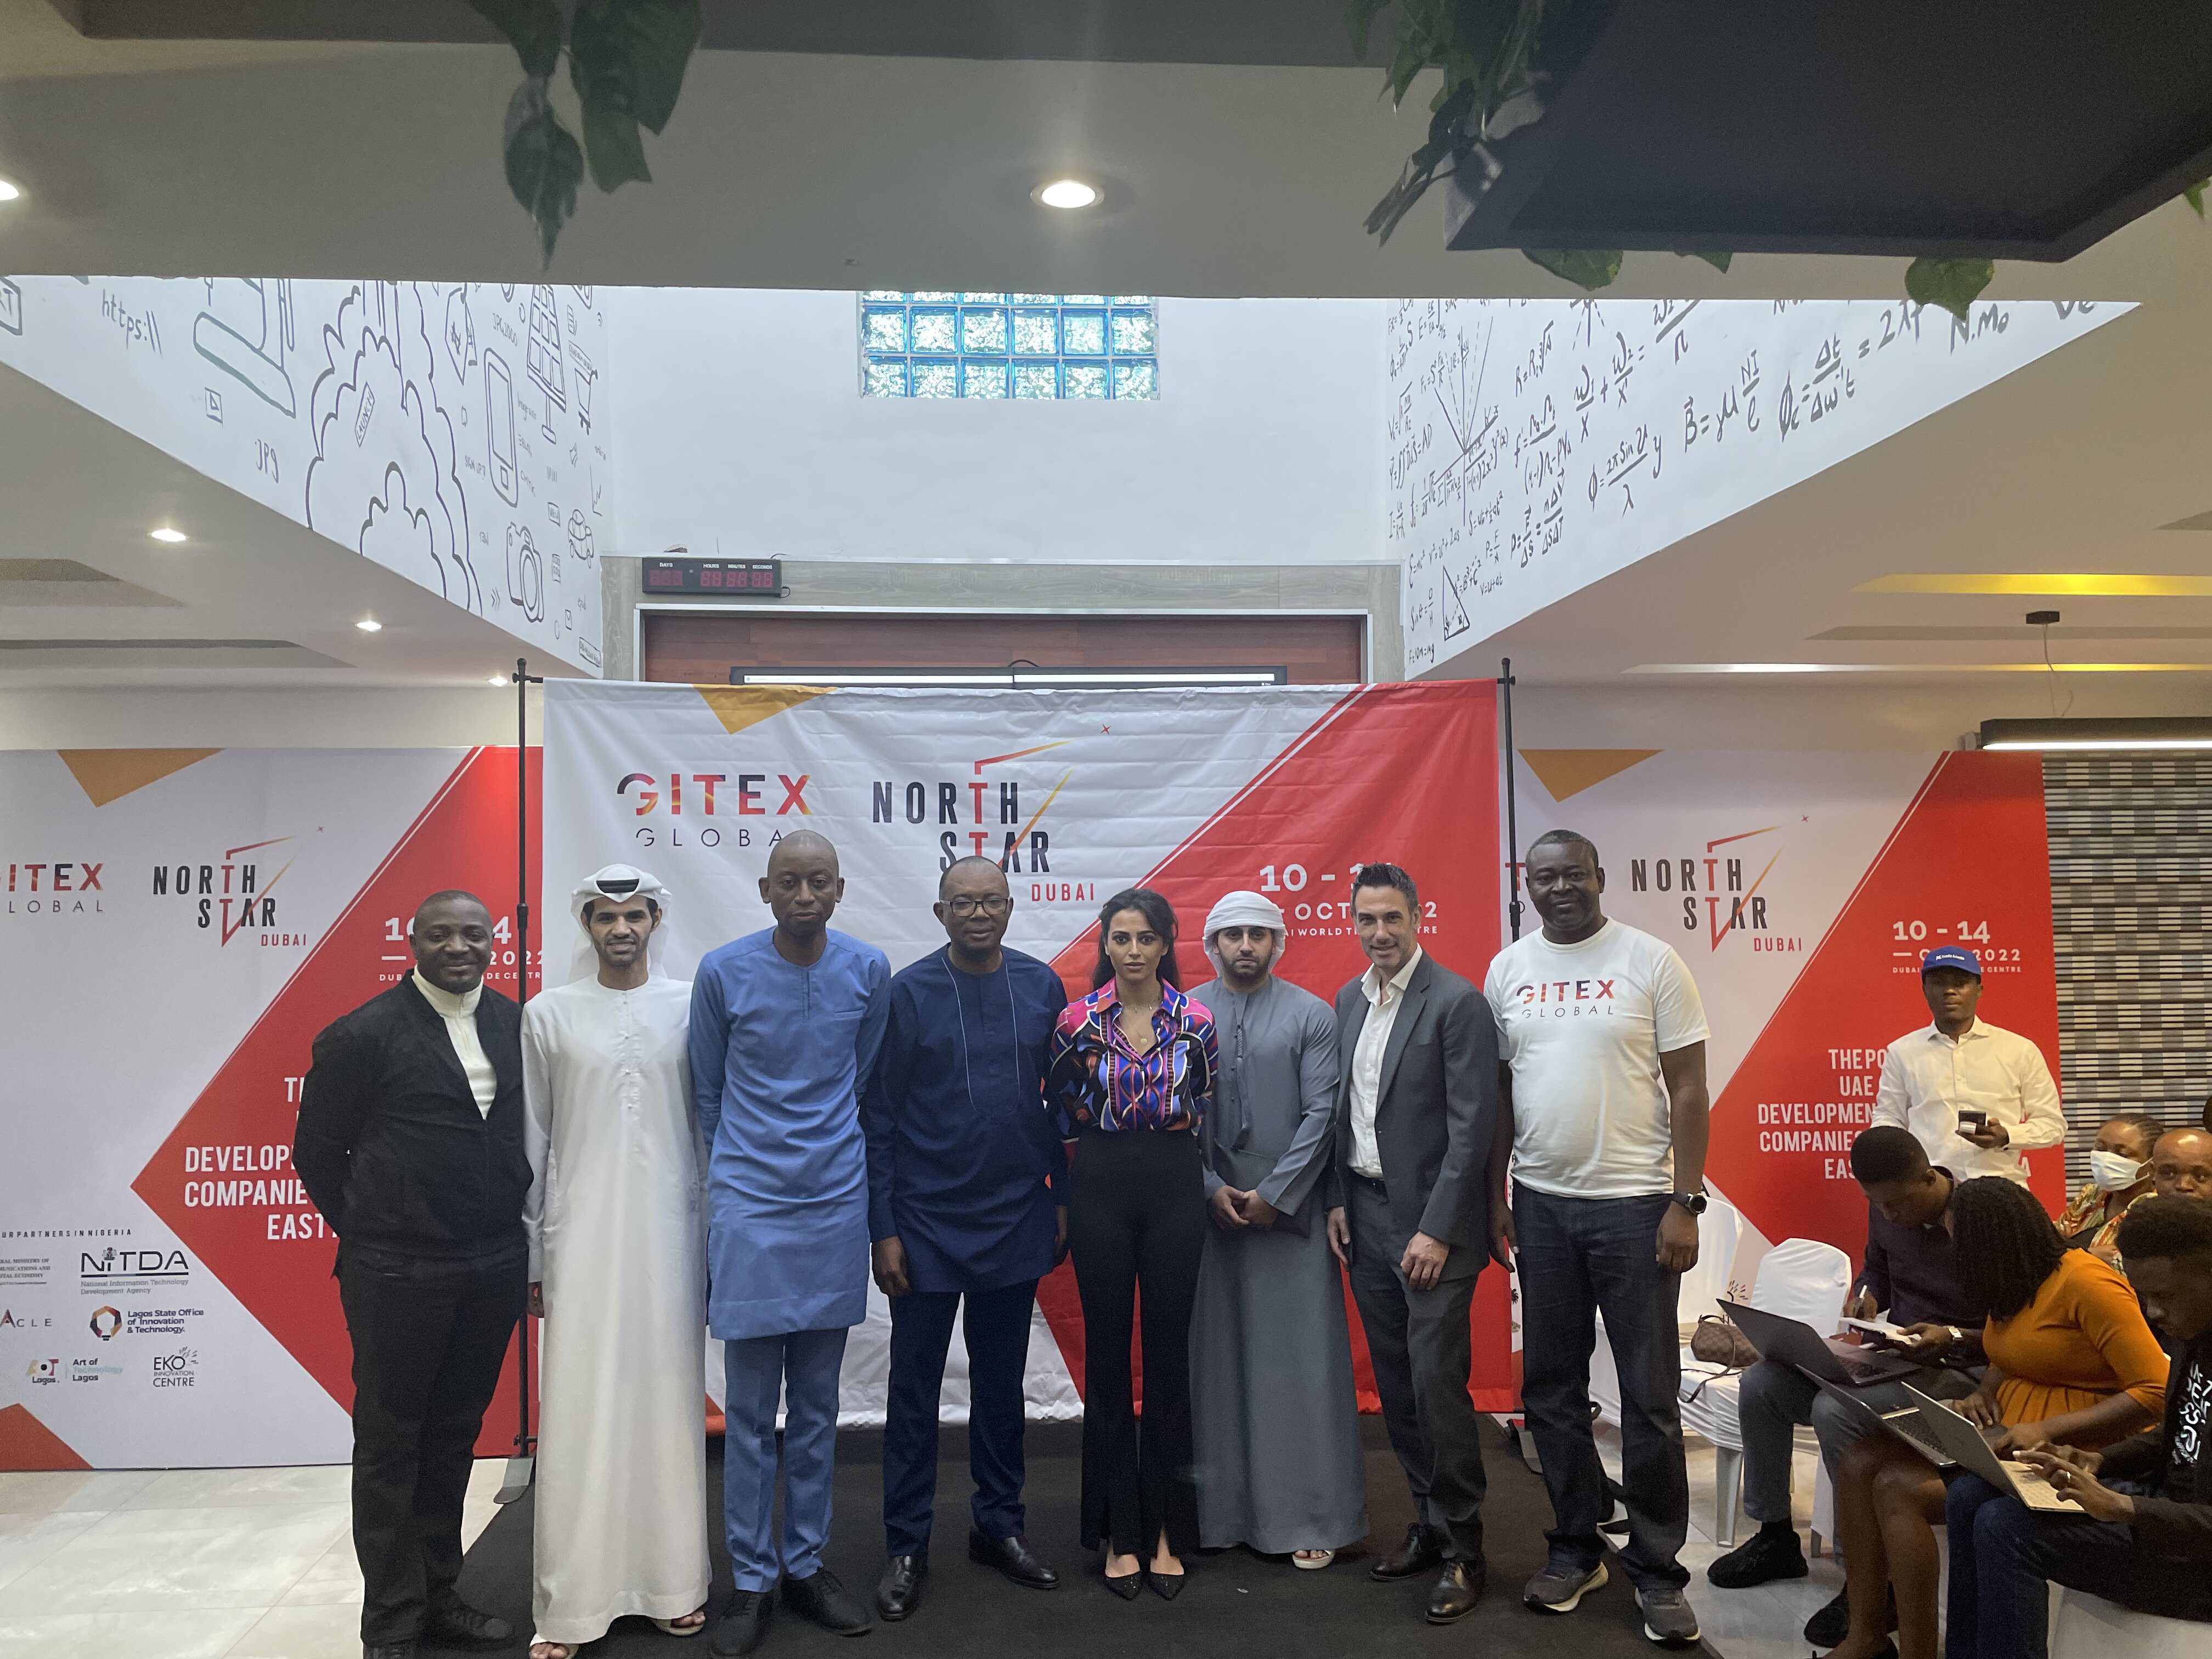 GITEX holds in lagos for the first time